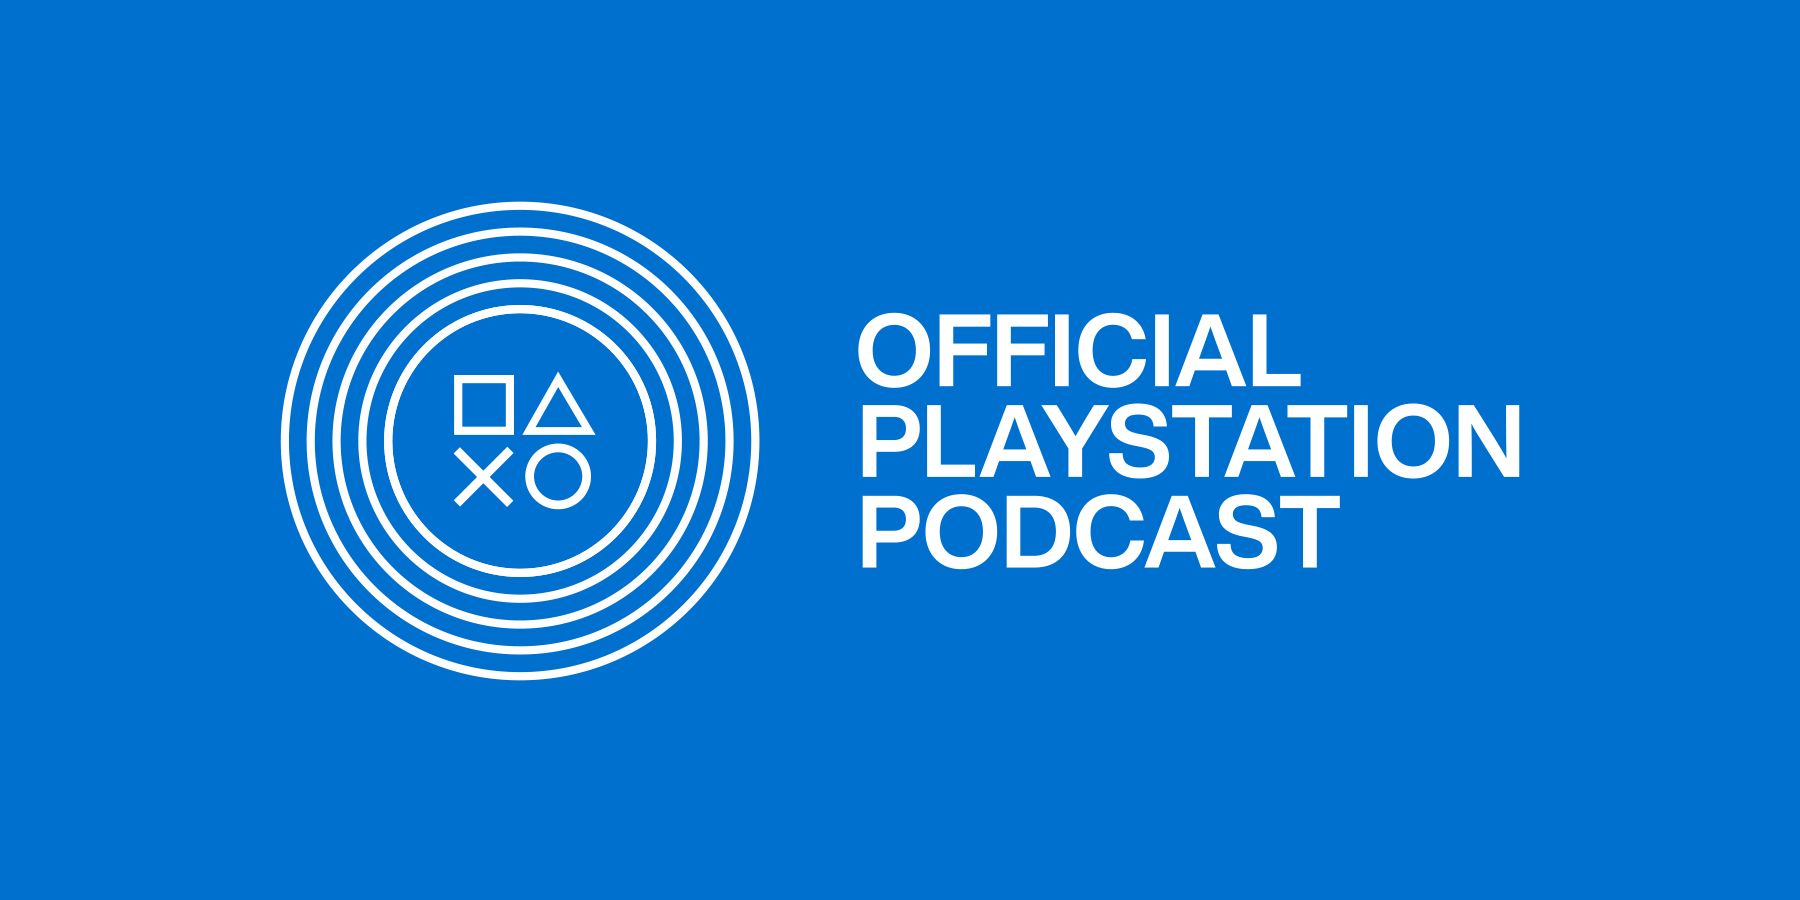 official playstation podcast logo